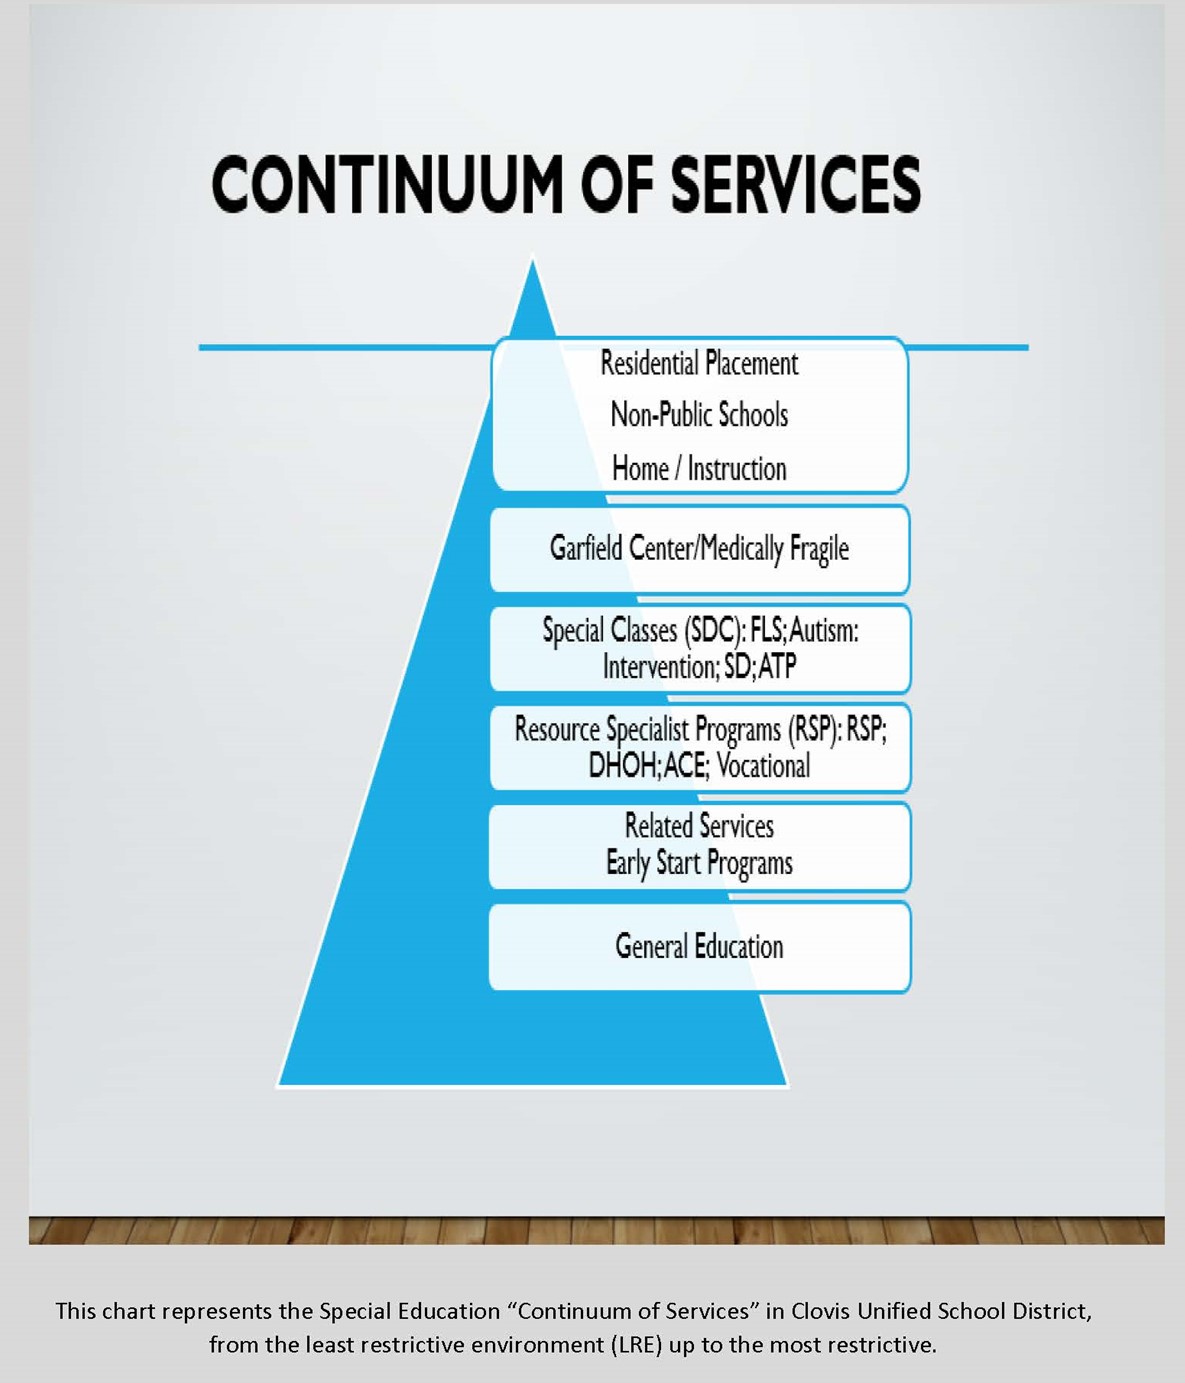 Image of CUSD Continuum of Services chart. RTF download is available on this page in the upper left hand corner.